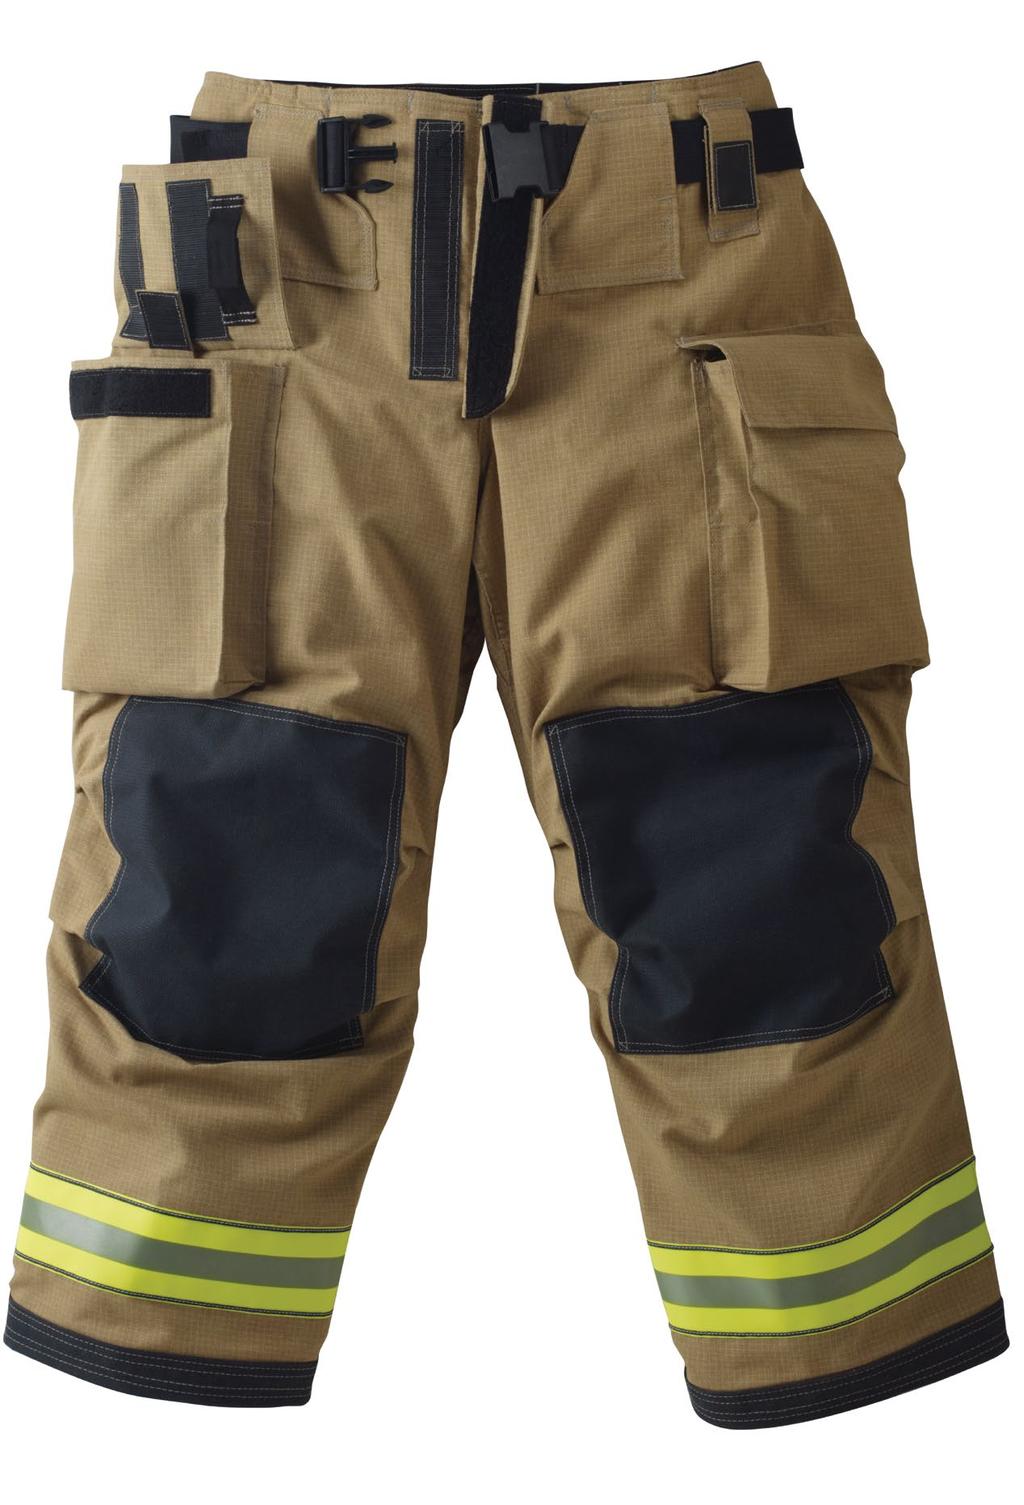 Made from KEVLAR, these harnesses meet NFPA 1971 (Structural Fire Fighting) requirements for flame and heat resistance when installed in the pants.